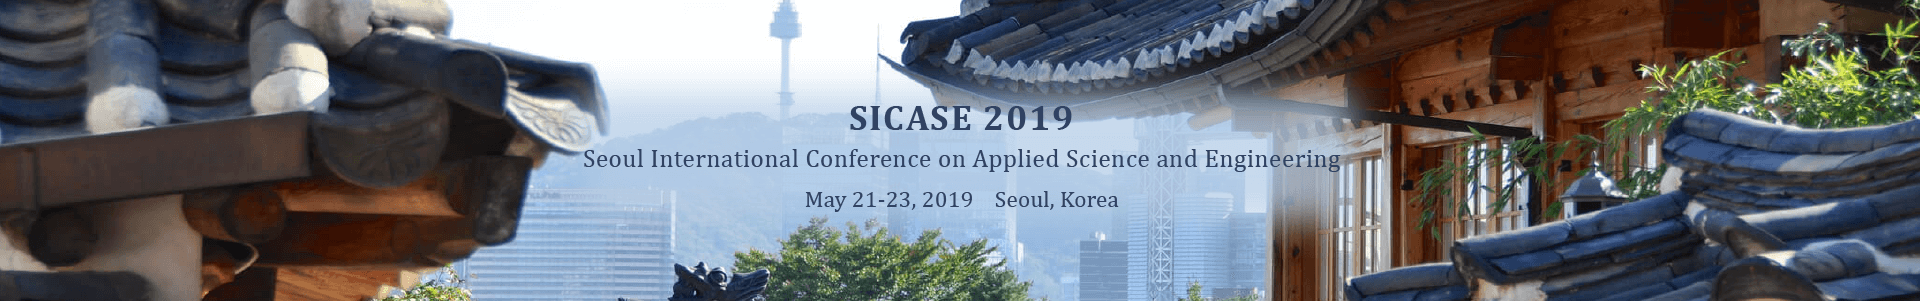 2019 SICASE The 6th Seoul International Conference on Applied Science and Engineering, Seoul, South korea